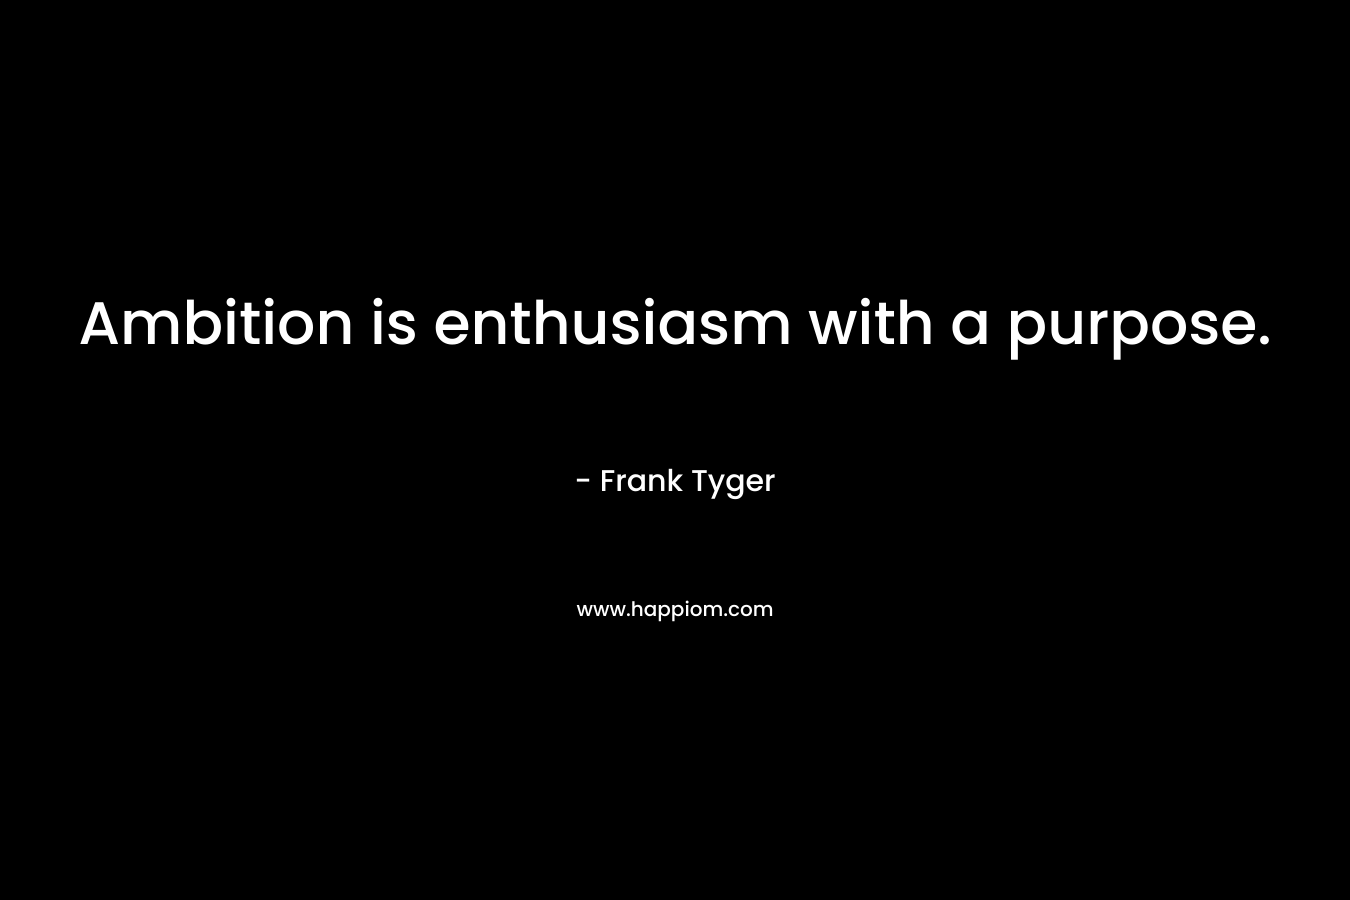 Ambition is enthusiasm with a purpose. – Frank Tyger